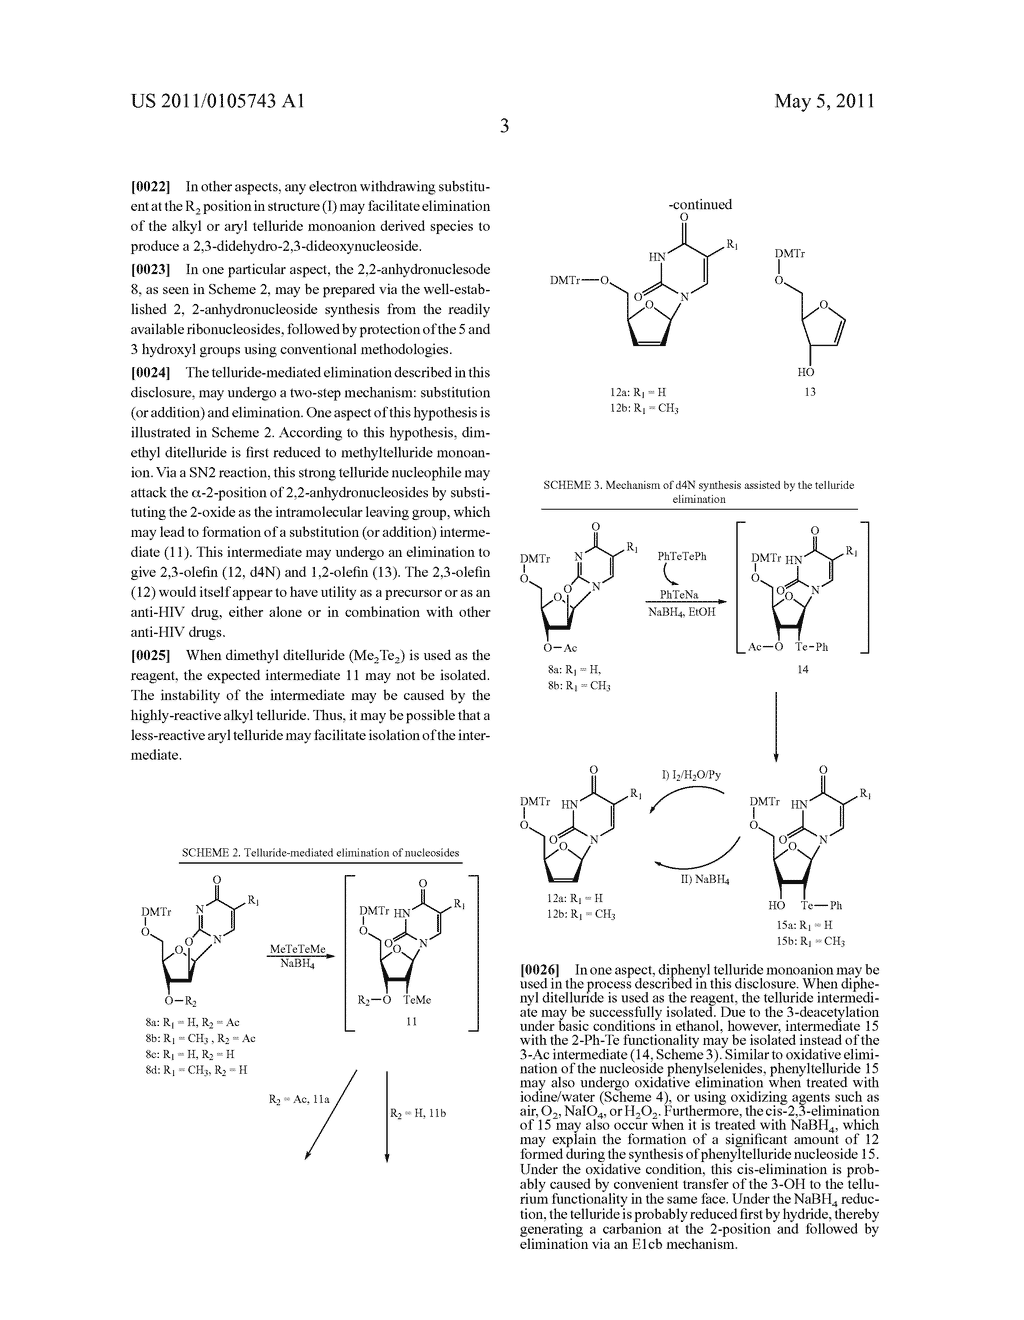 IMPROVED METHOD AND PROCESS FOR SYNTHESIS OF 2',3'-DIDEHYDRO-2',3'-DIDEOXYNUCLEOSIDES - diagram, schematic, and image 04